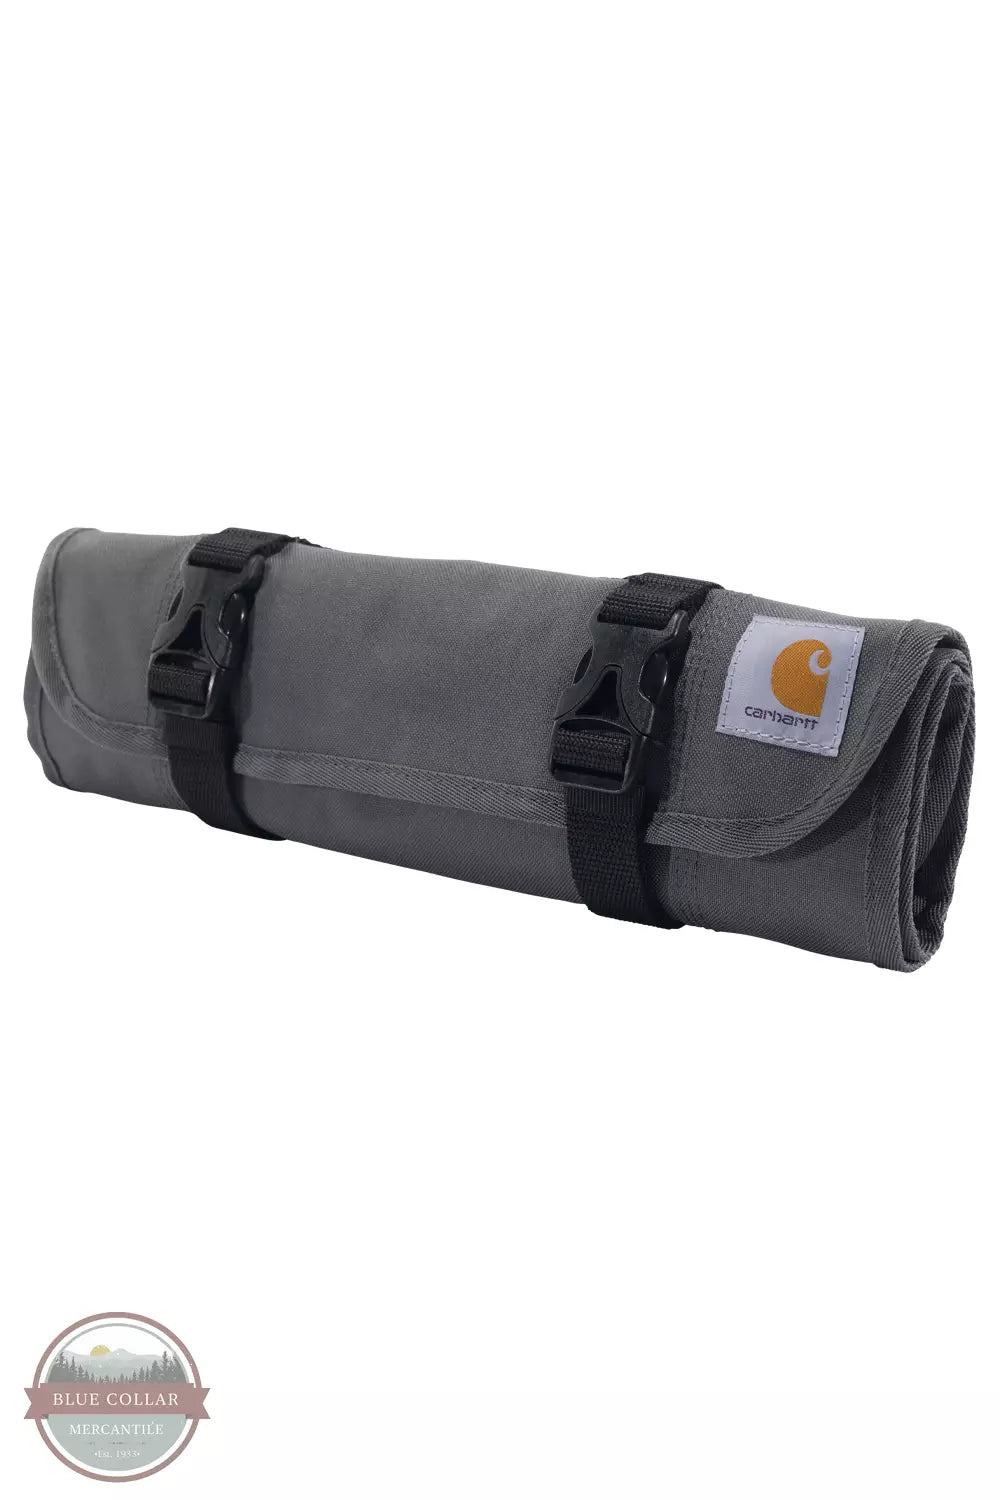 Carhartt B0000355 Utility Roll 18 Pocket Grey Rolled Up View